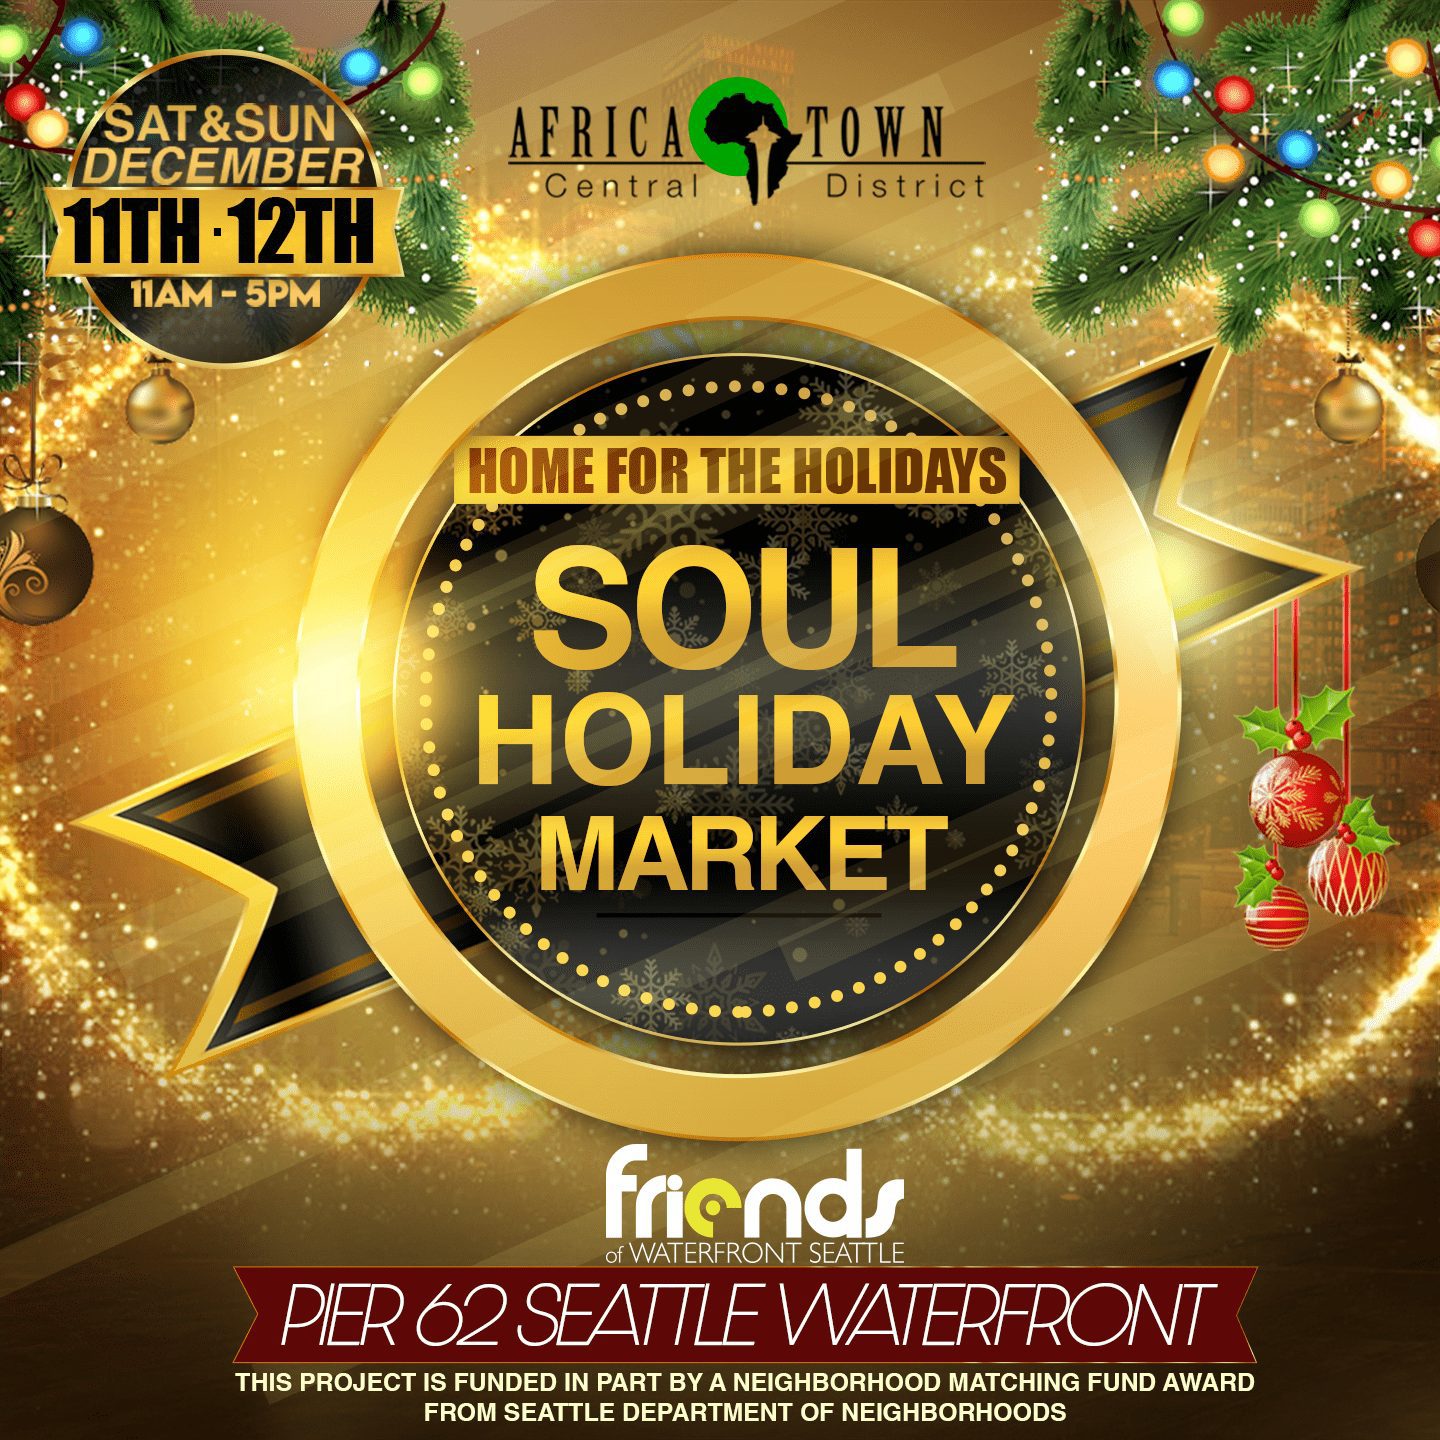 Africatown Soul Holiday Market: Home for the Holidays - Dec 11 & 12, 11am-5pm by Africatown and Friends of Waterfront Seattle, at Pier 62. This graphic looks festive with gold and black, plus a few evergreen tree boughs, lights, baubles, and sparkles.